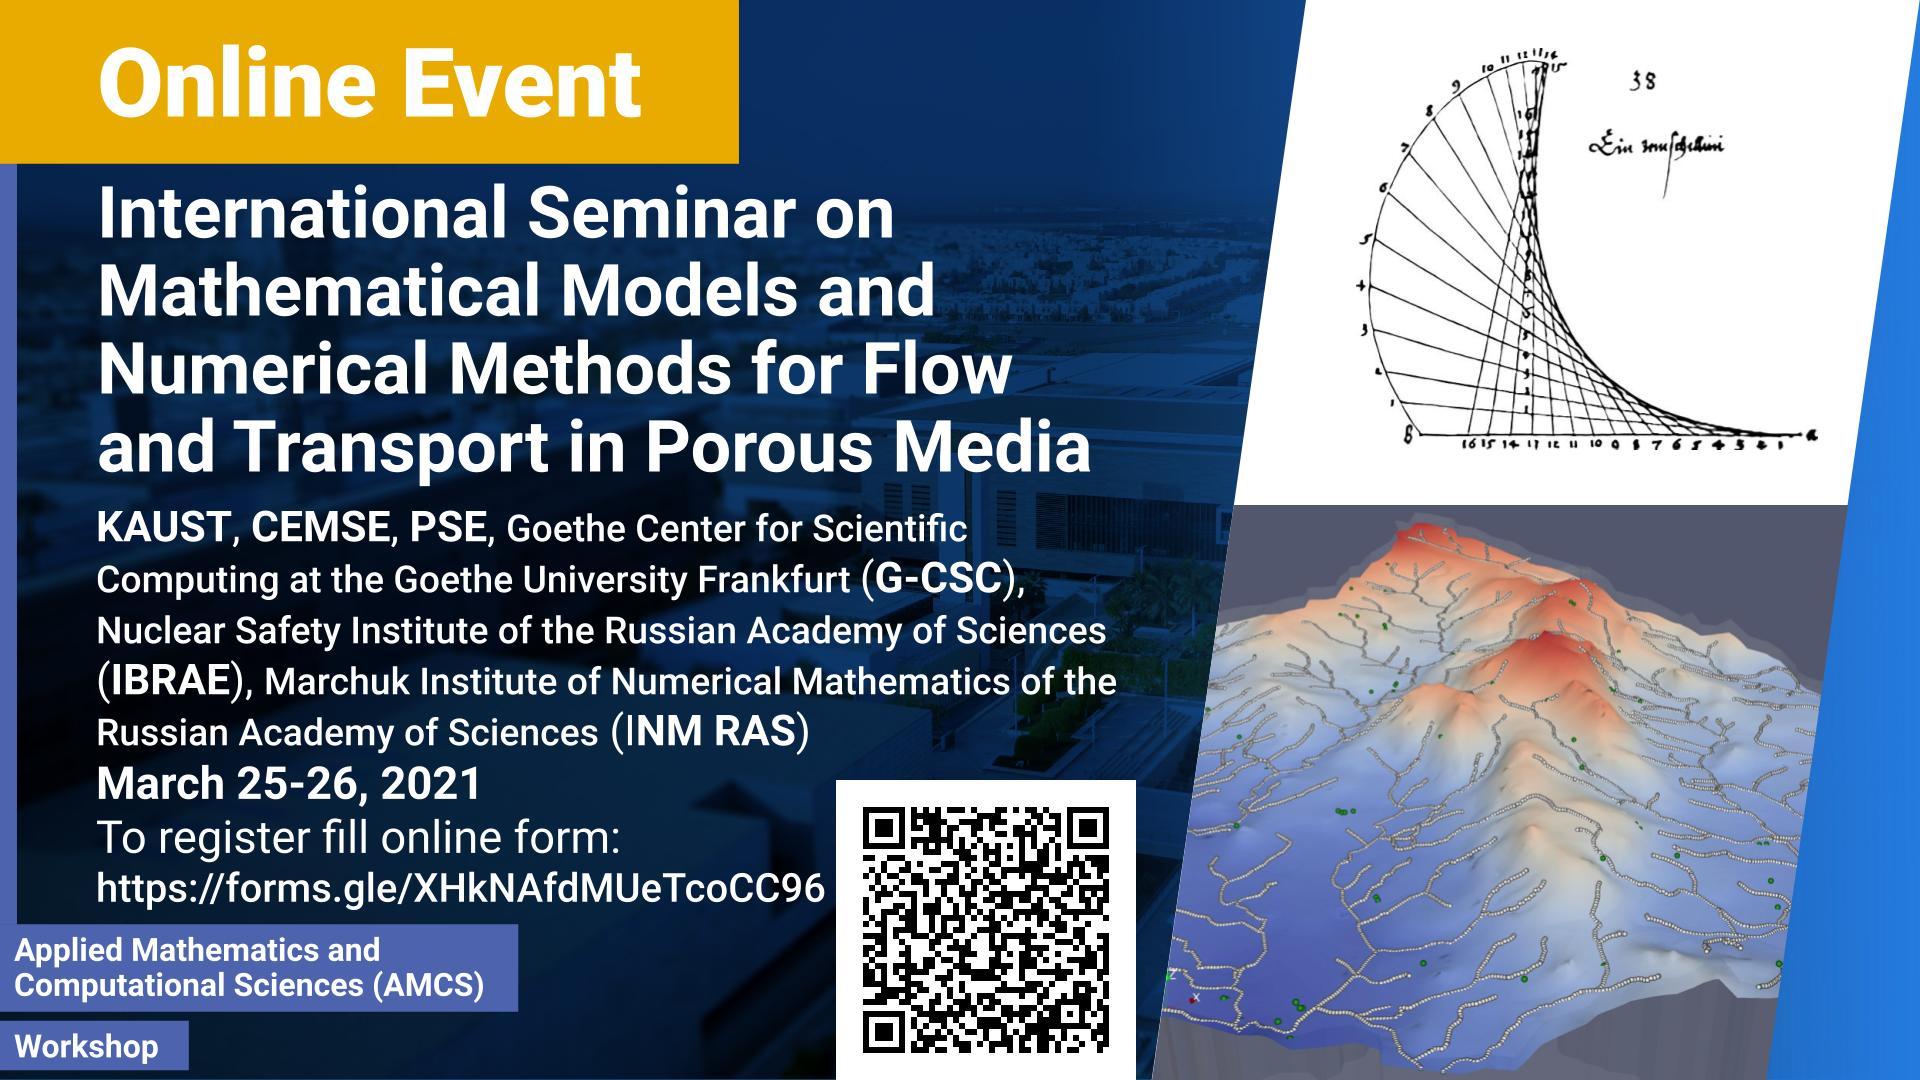 KAUST CEMSE AMCS MaS Workshop Mathematical Models and Numerical Methods for Flow and Transport in Porous Media